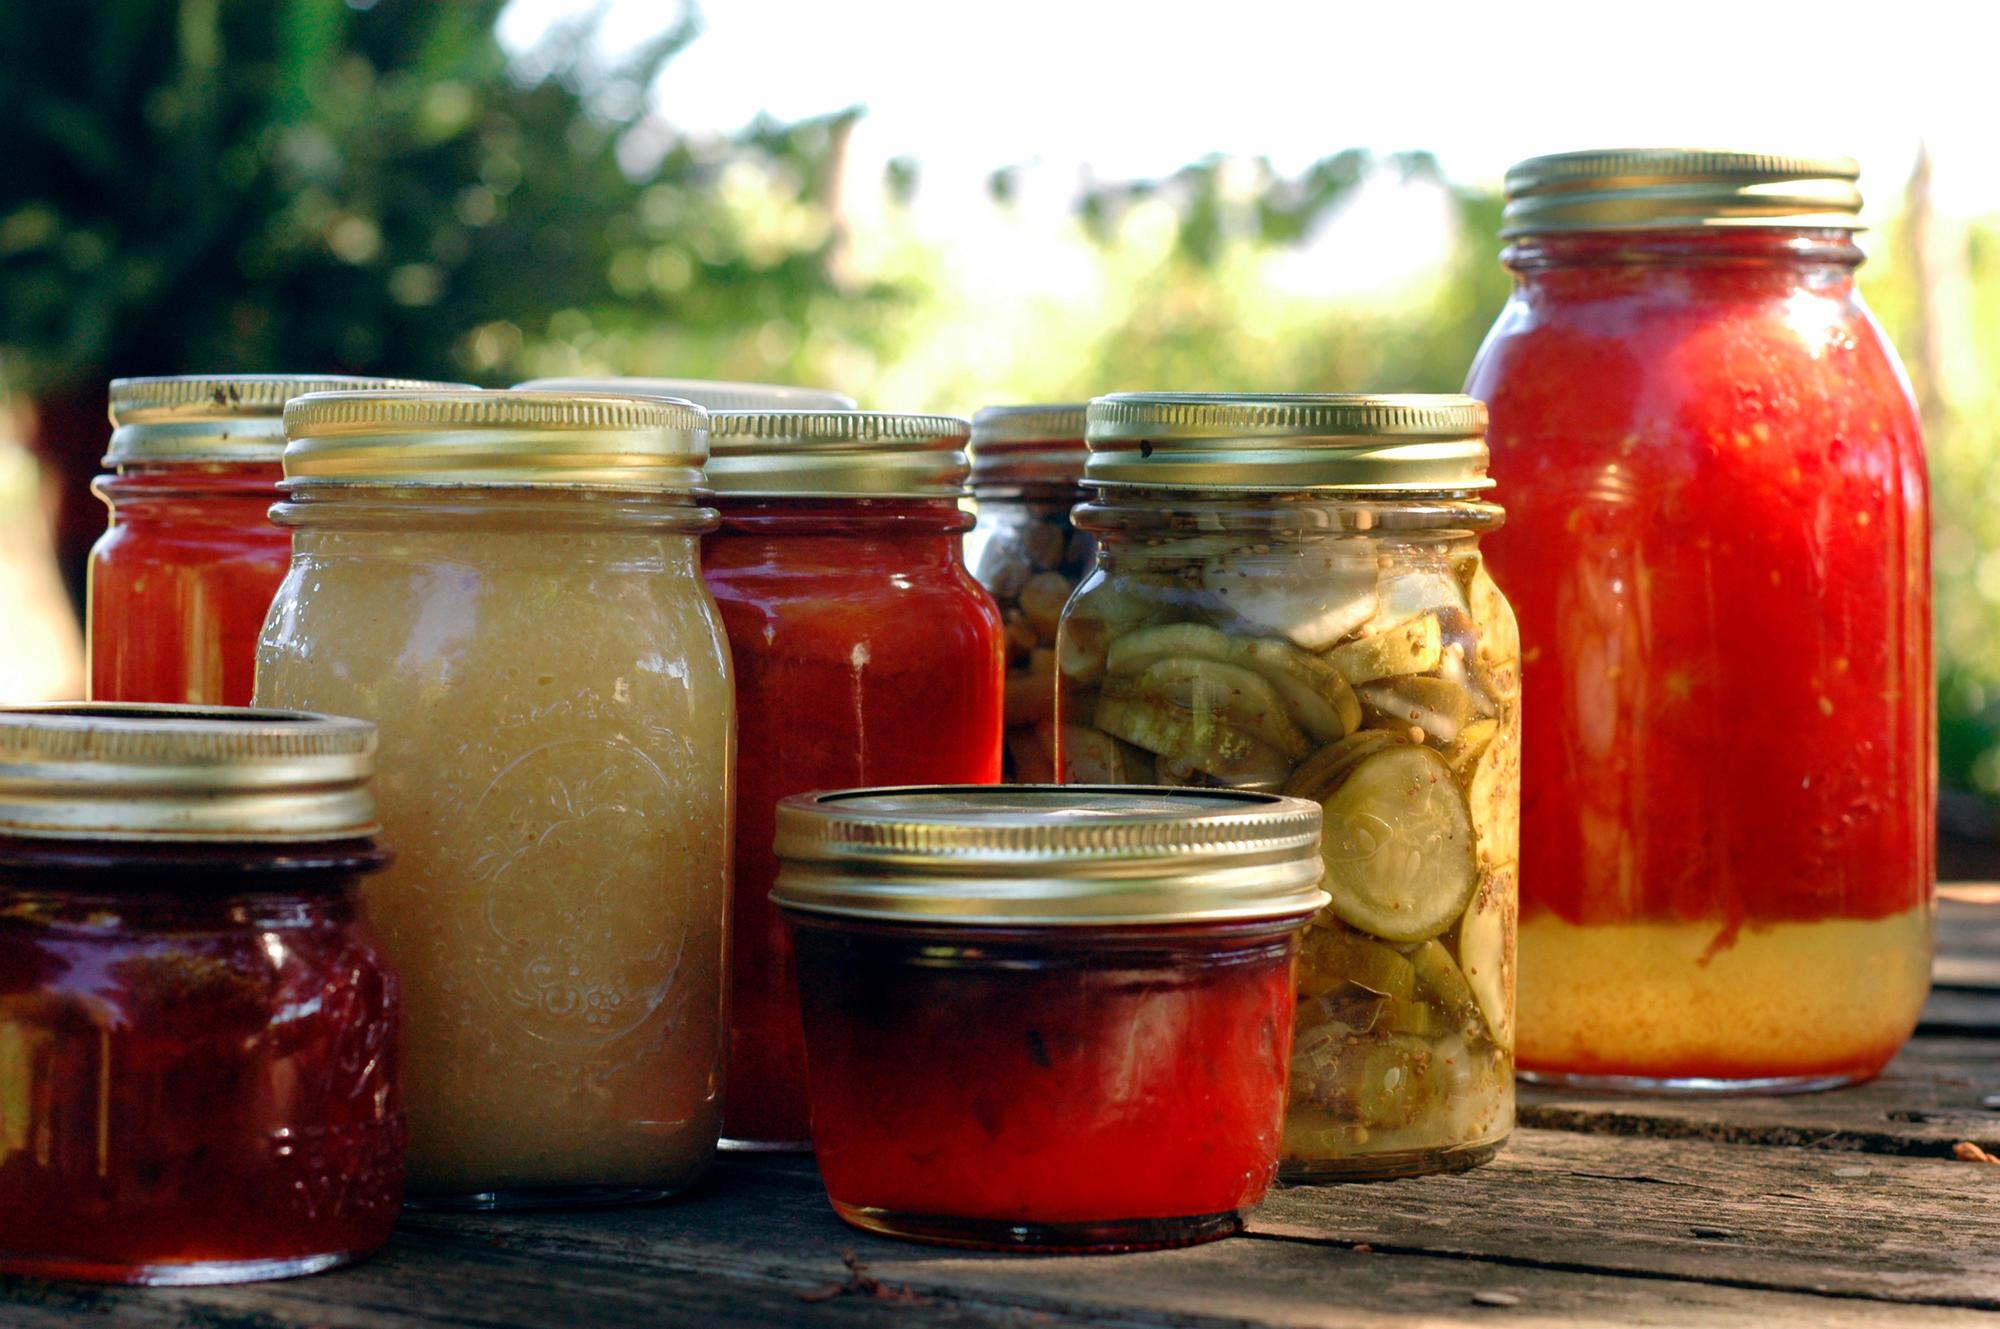 A variety of canned goods in glass Mason jars.